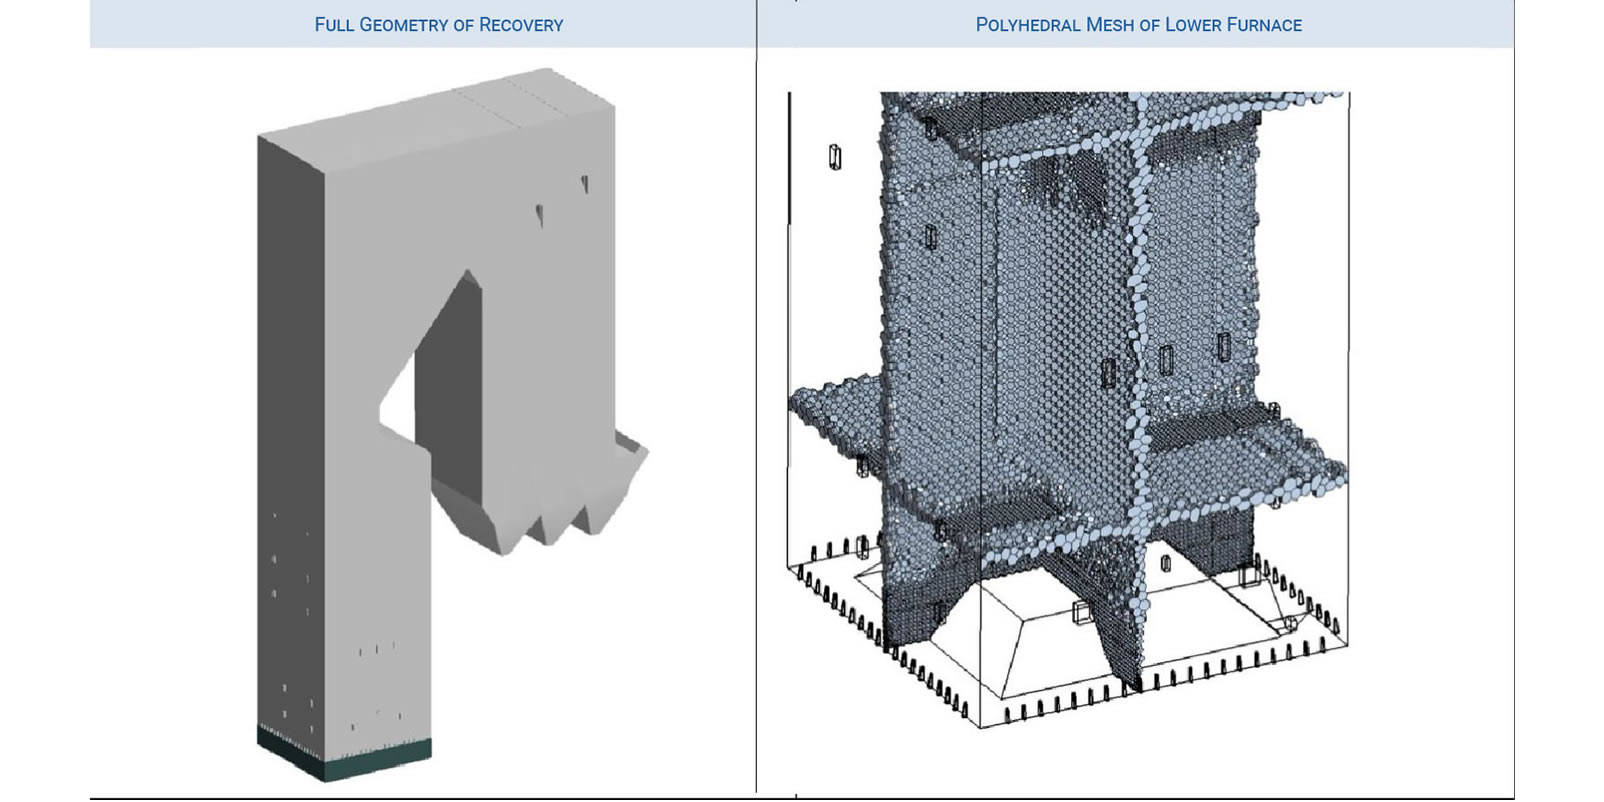 Full recovery boiler geometry. Right: View of polyhedral mesh, wall prism layers, and combustion air refinement in lower furnace of the boiler.